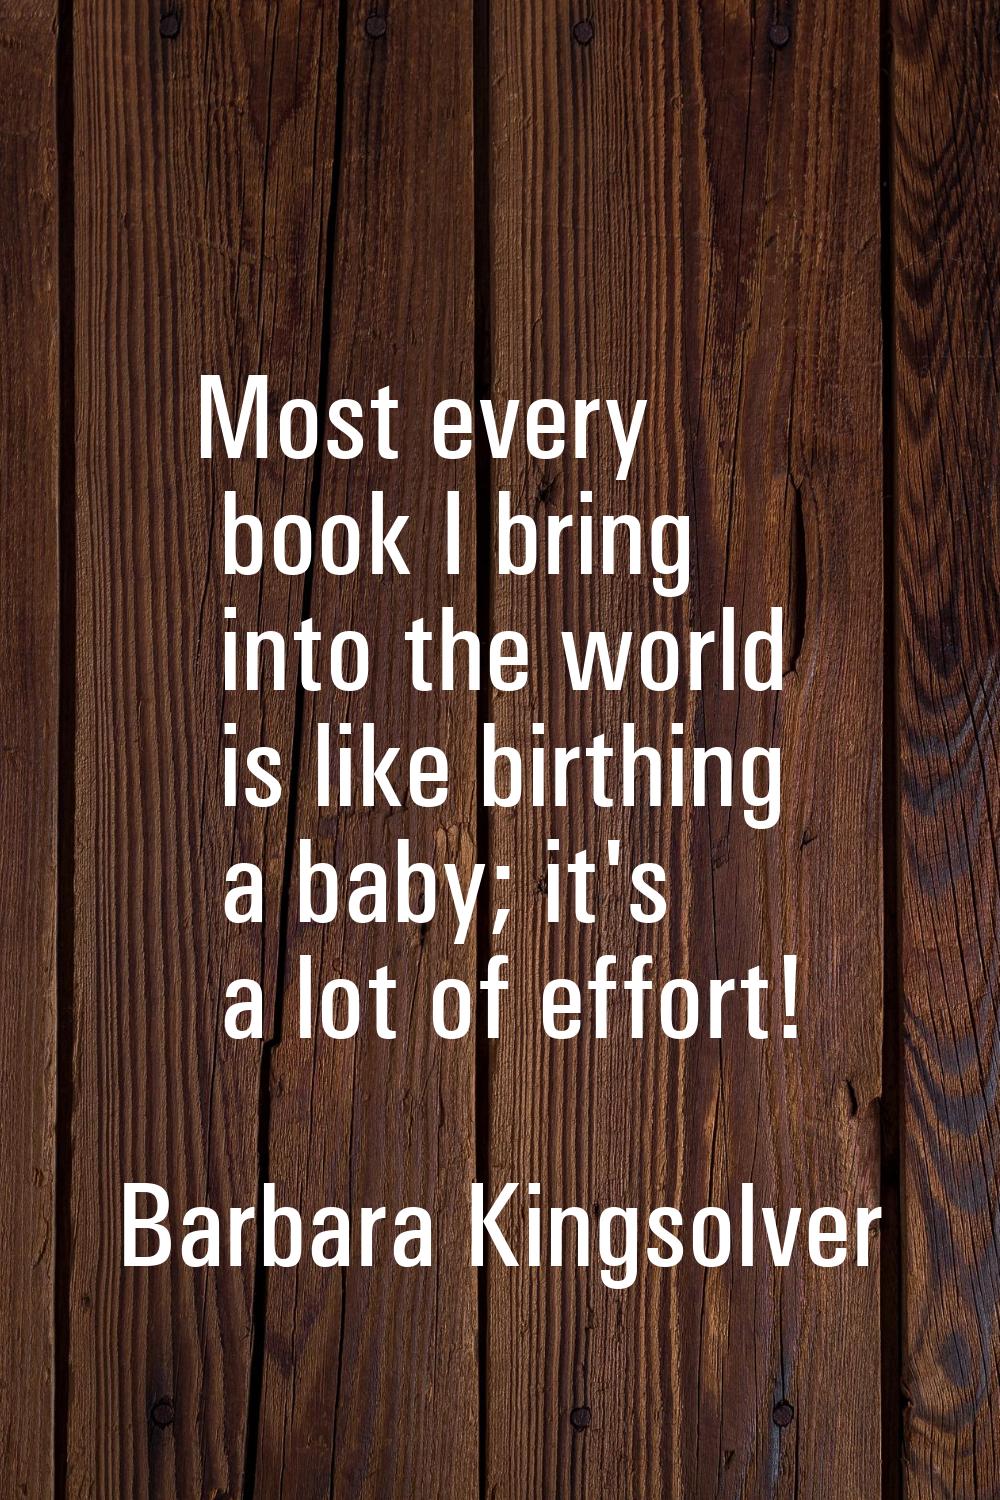 Most every book I bring into the world is like birthing a baby; it's a lot of effort!